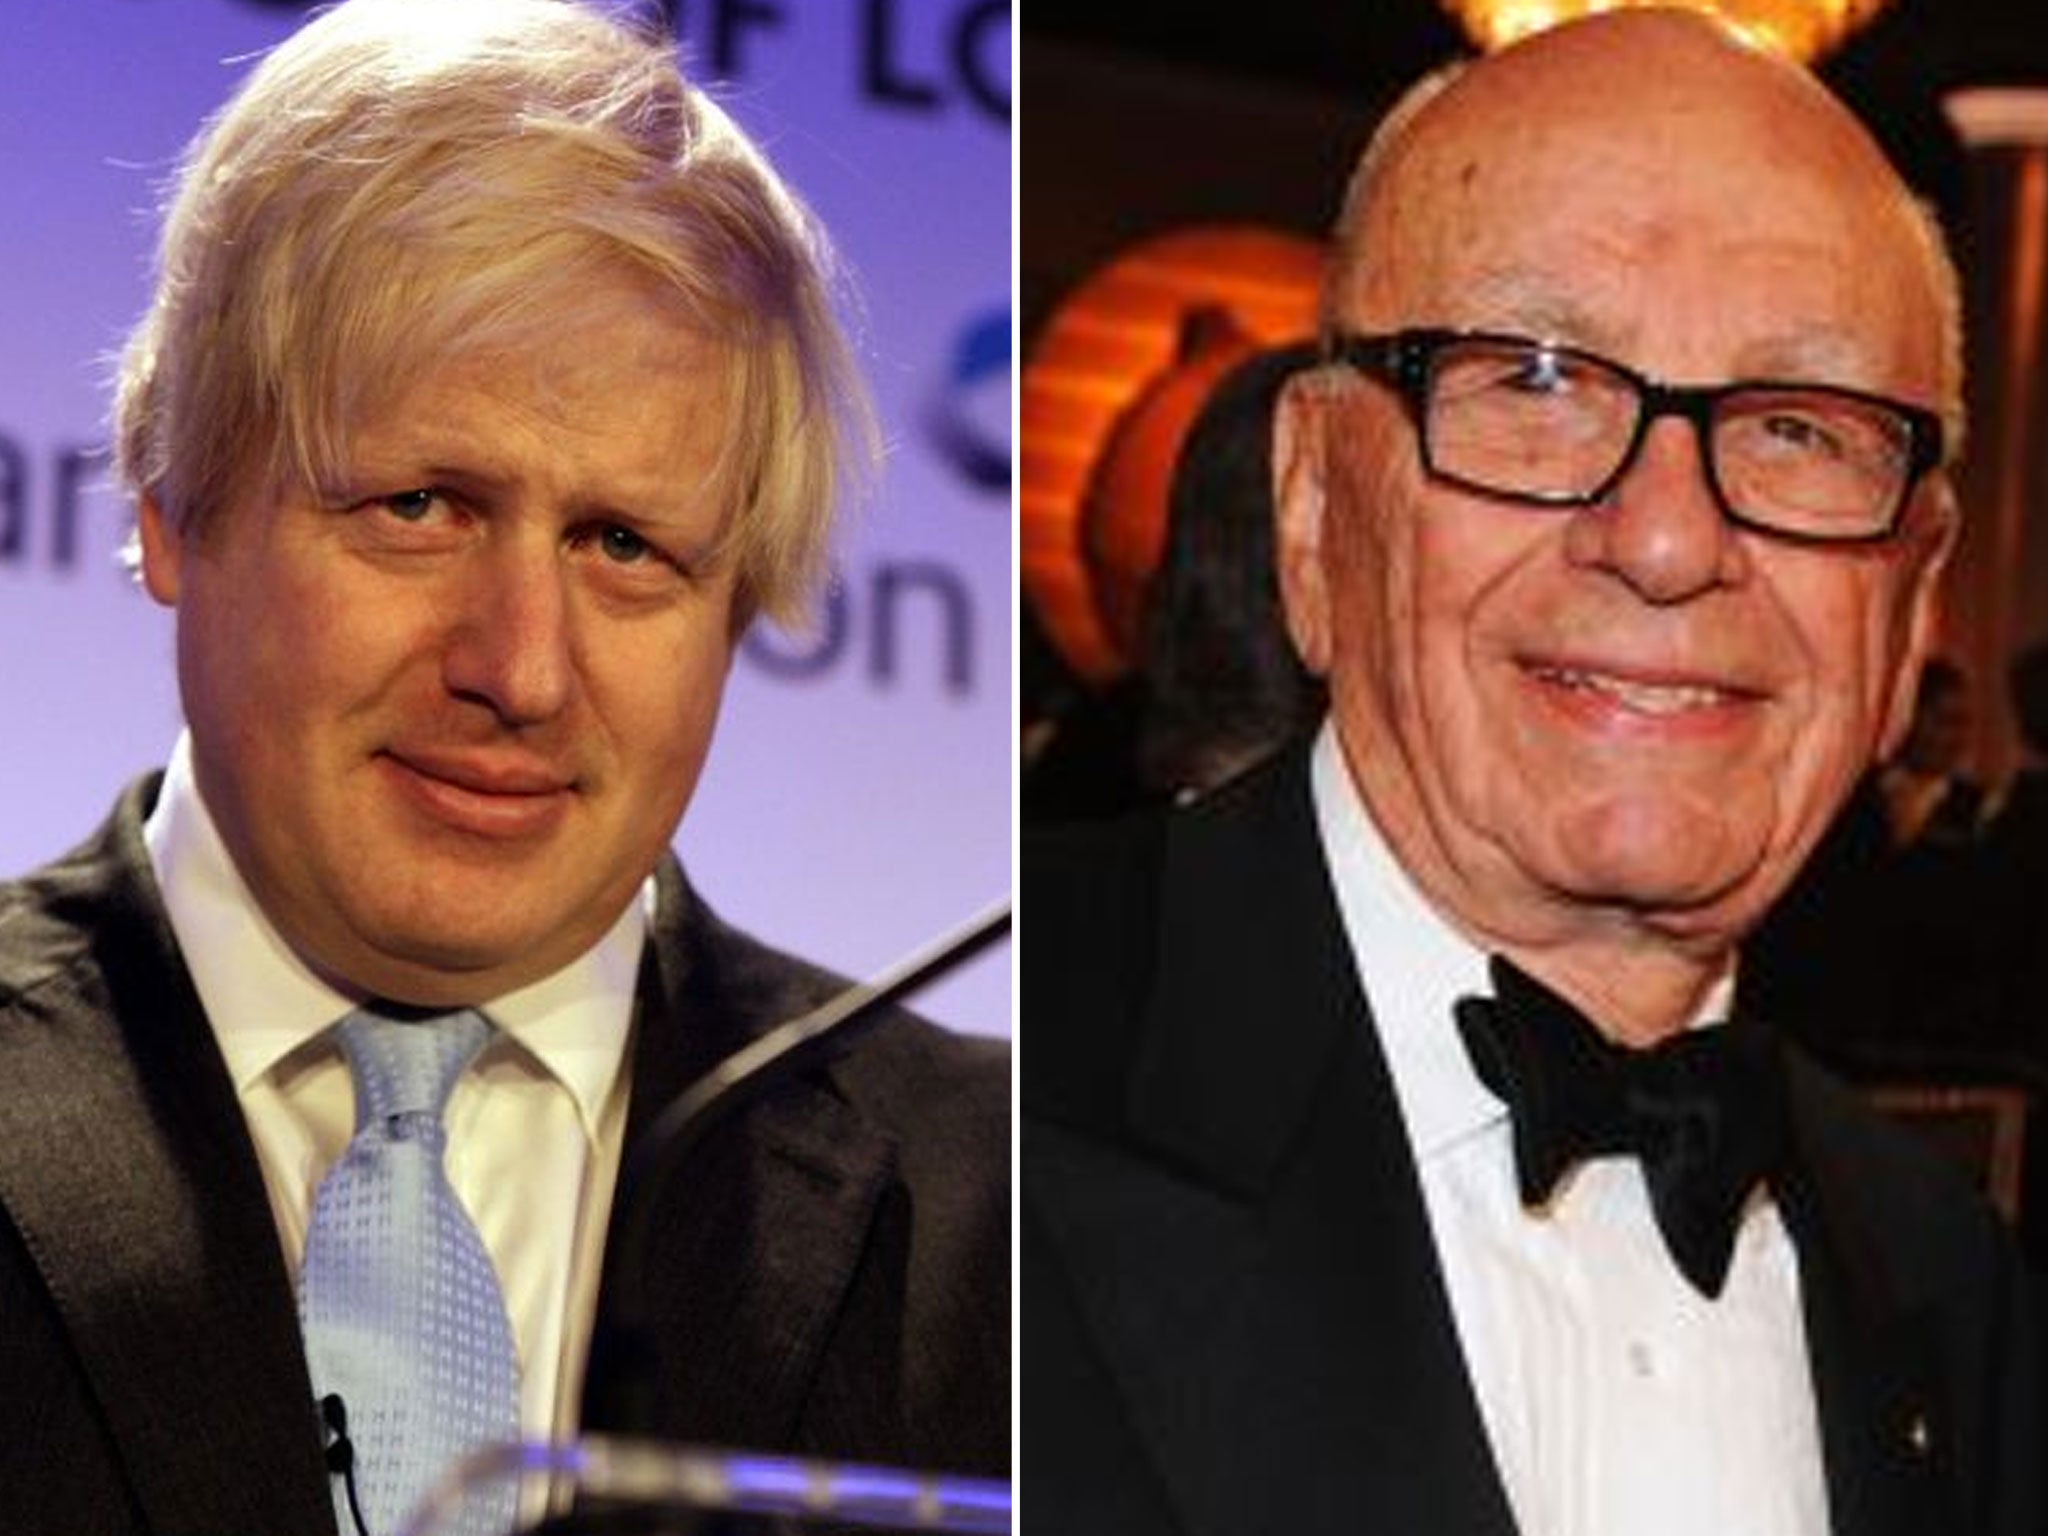 Boris Johnson and Rupert Murdoch have had at least two private meetings in the last six months